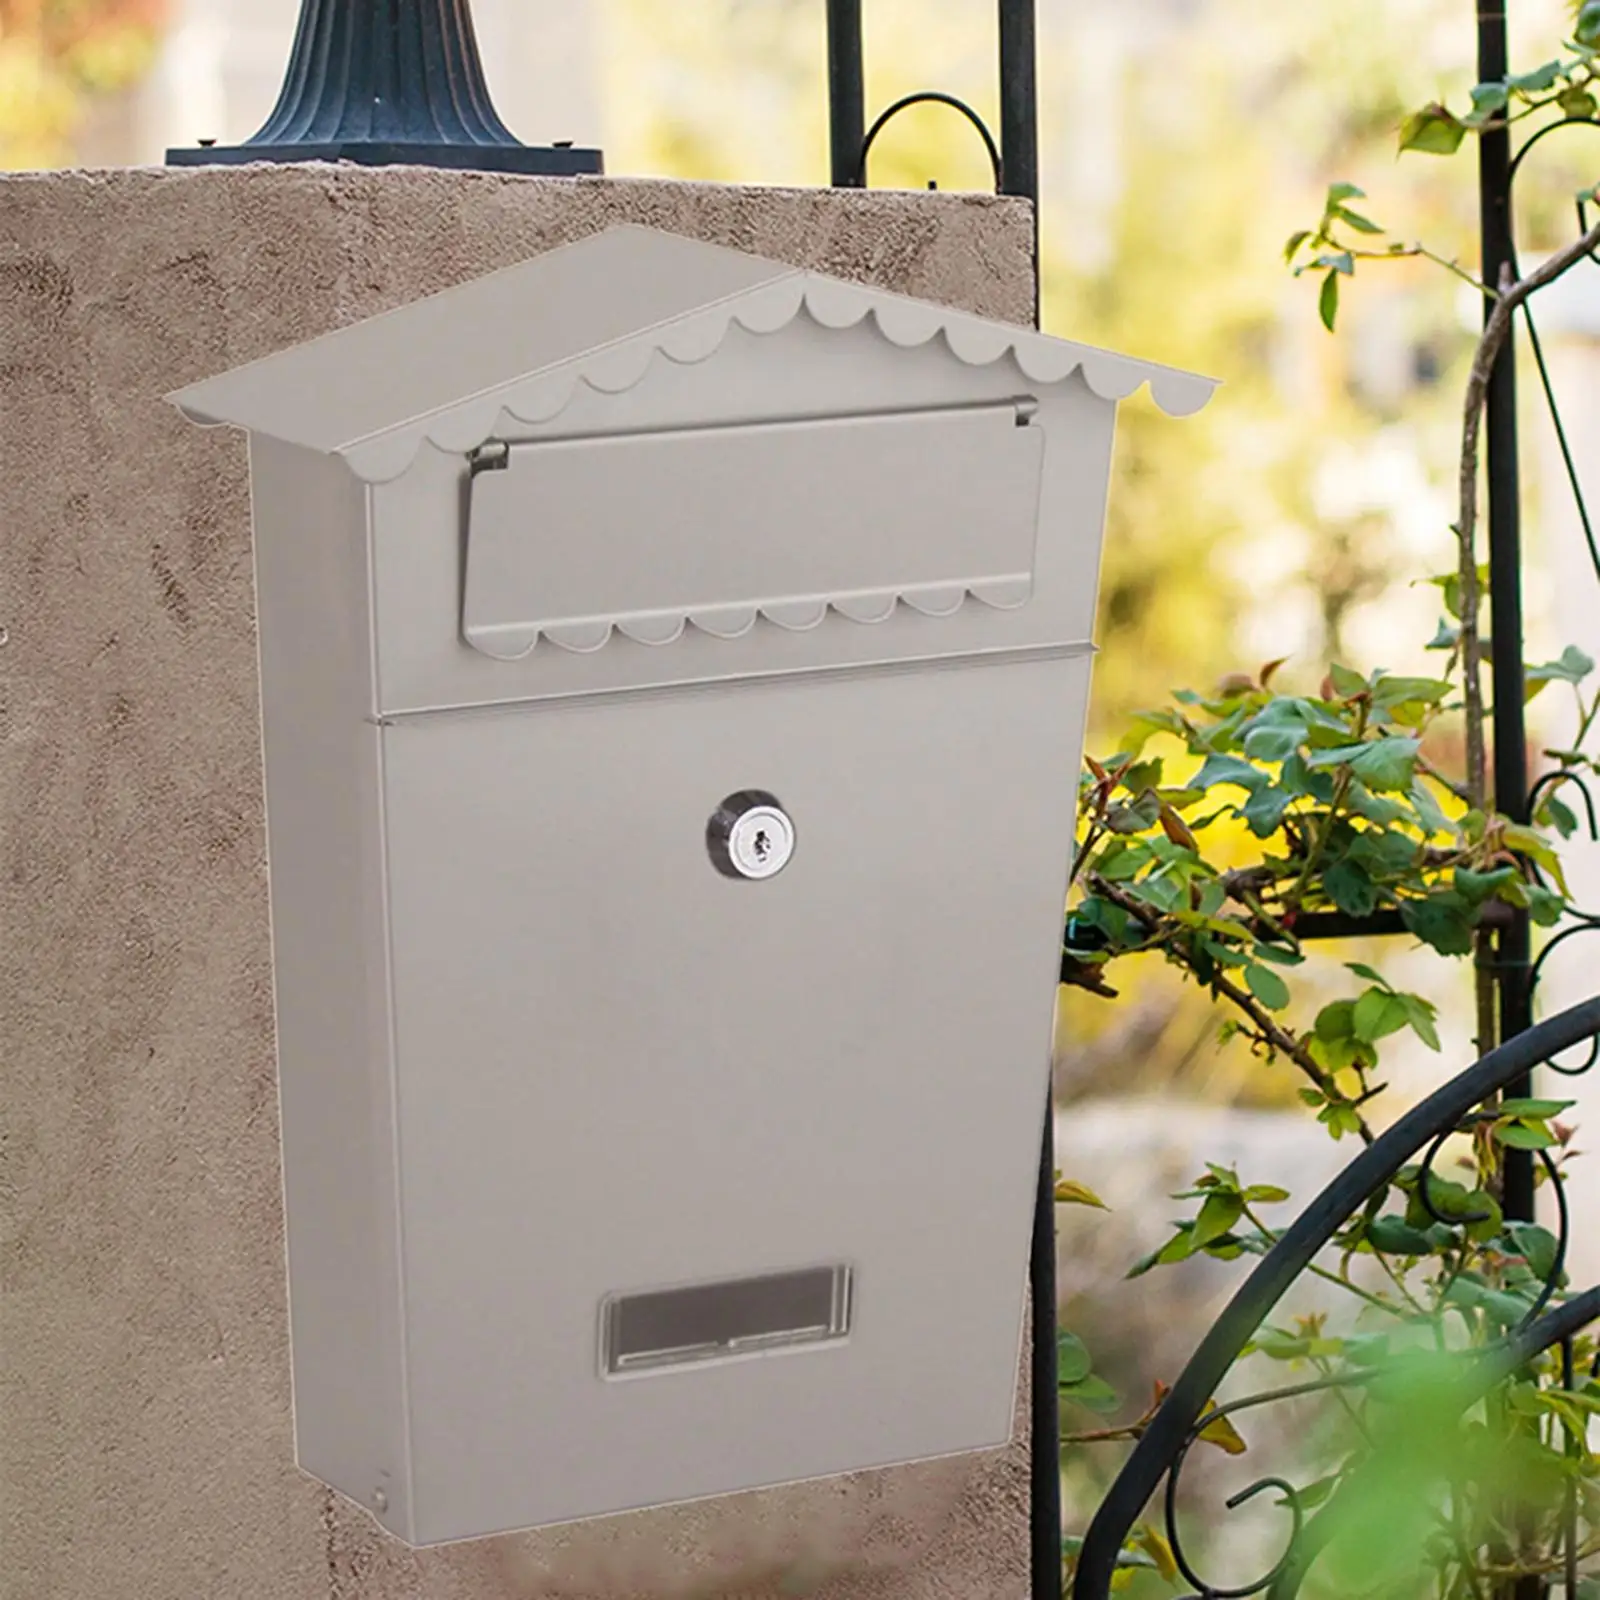 Wall Mount Mailbox Large Capacity Locking Mailboxes with Key Lock Metal Mail Box for Home Decorative